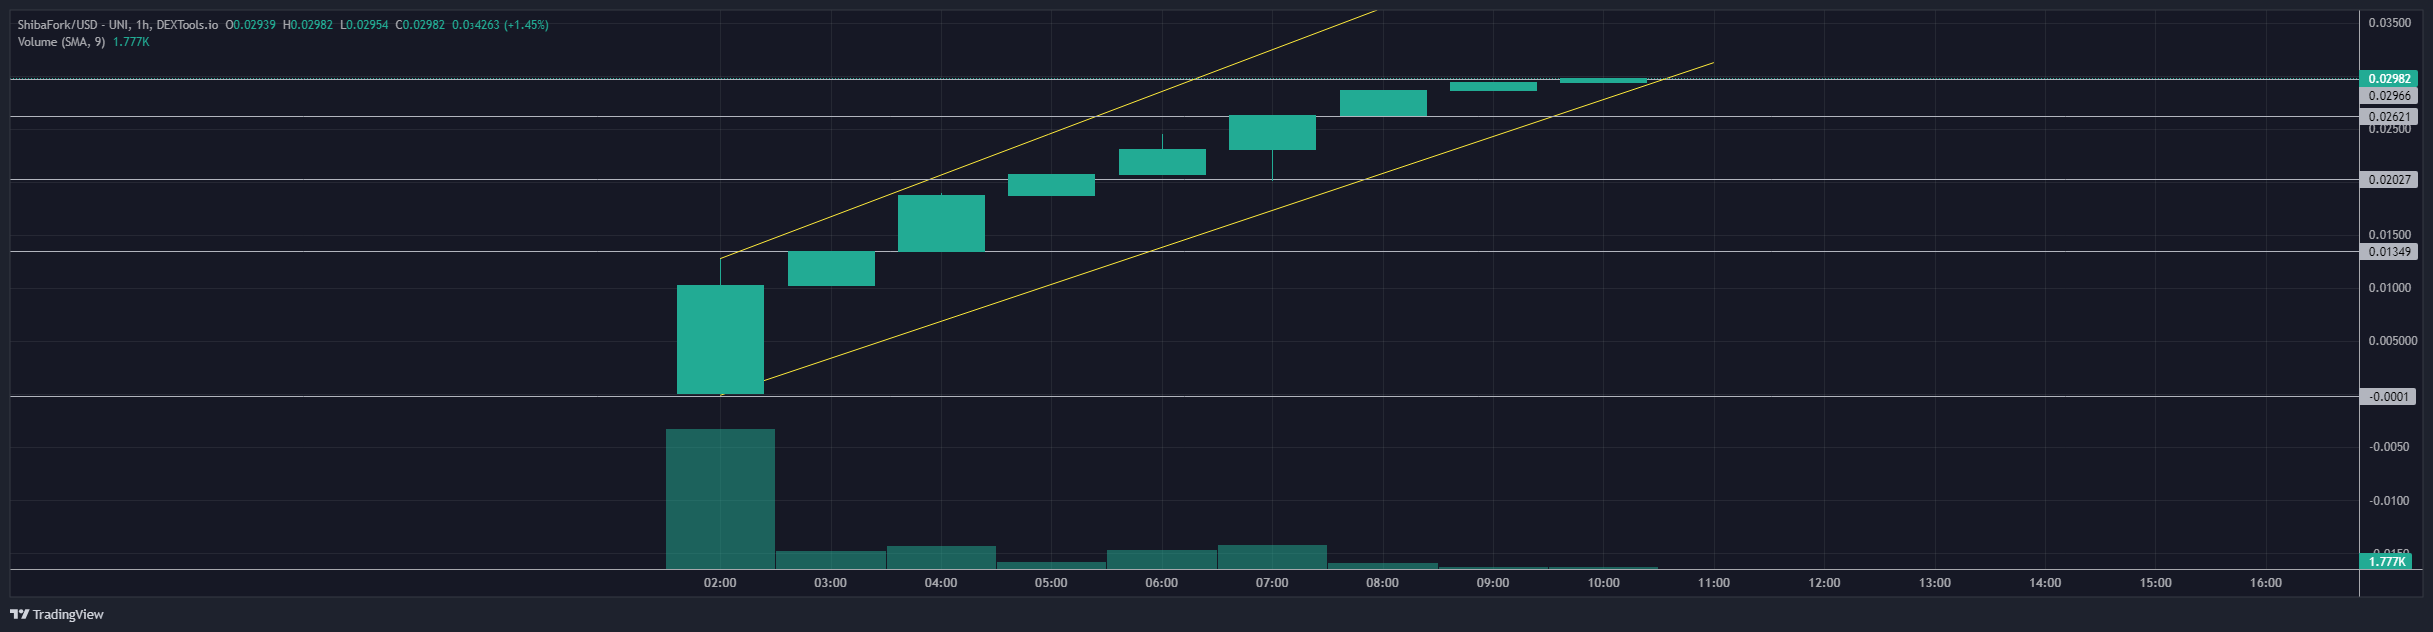 ShibaFork Price Analysis: In a return to ERC-20 meme coins, a new SHIB spinoff token called ShibaFork has exploded +56,986% - discover here.